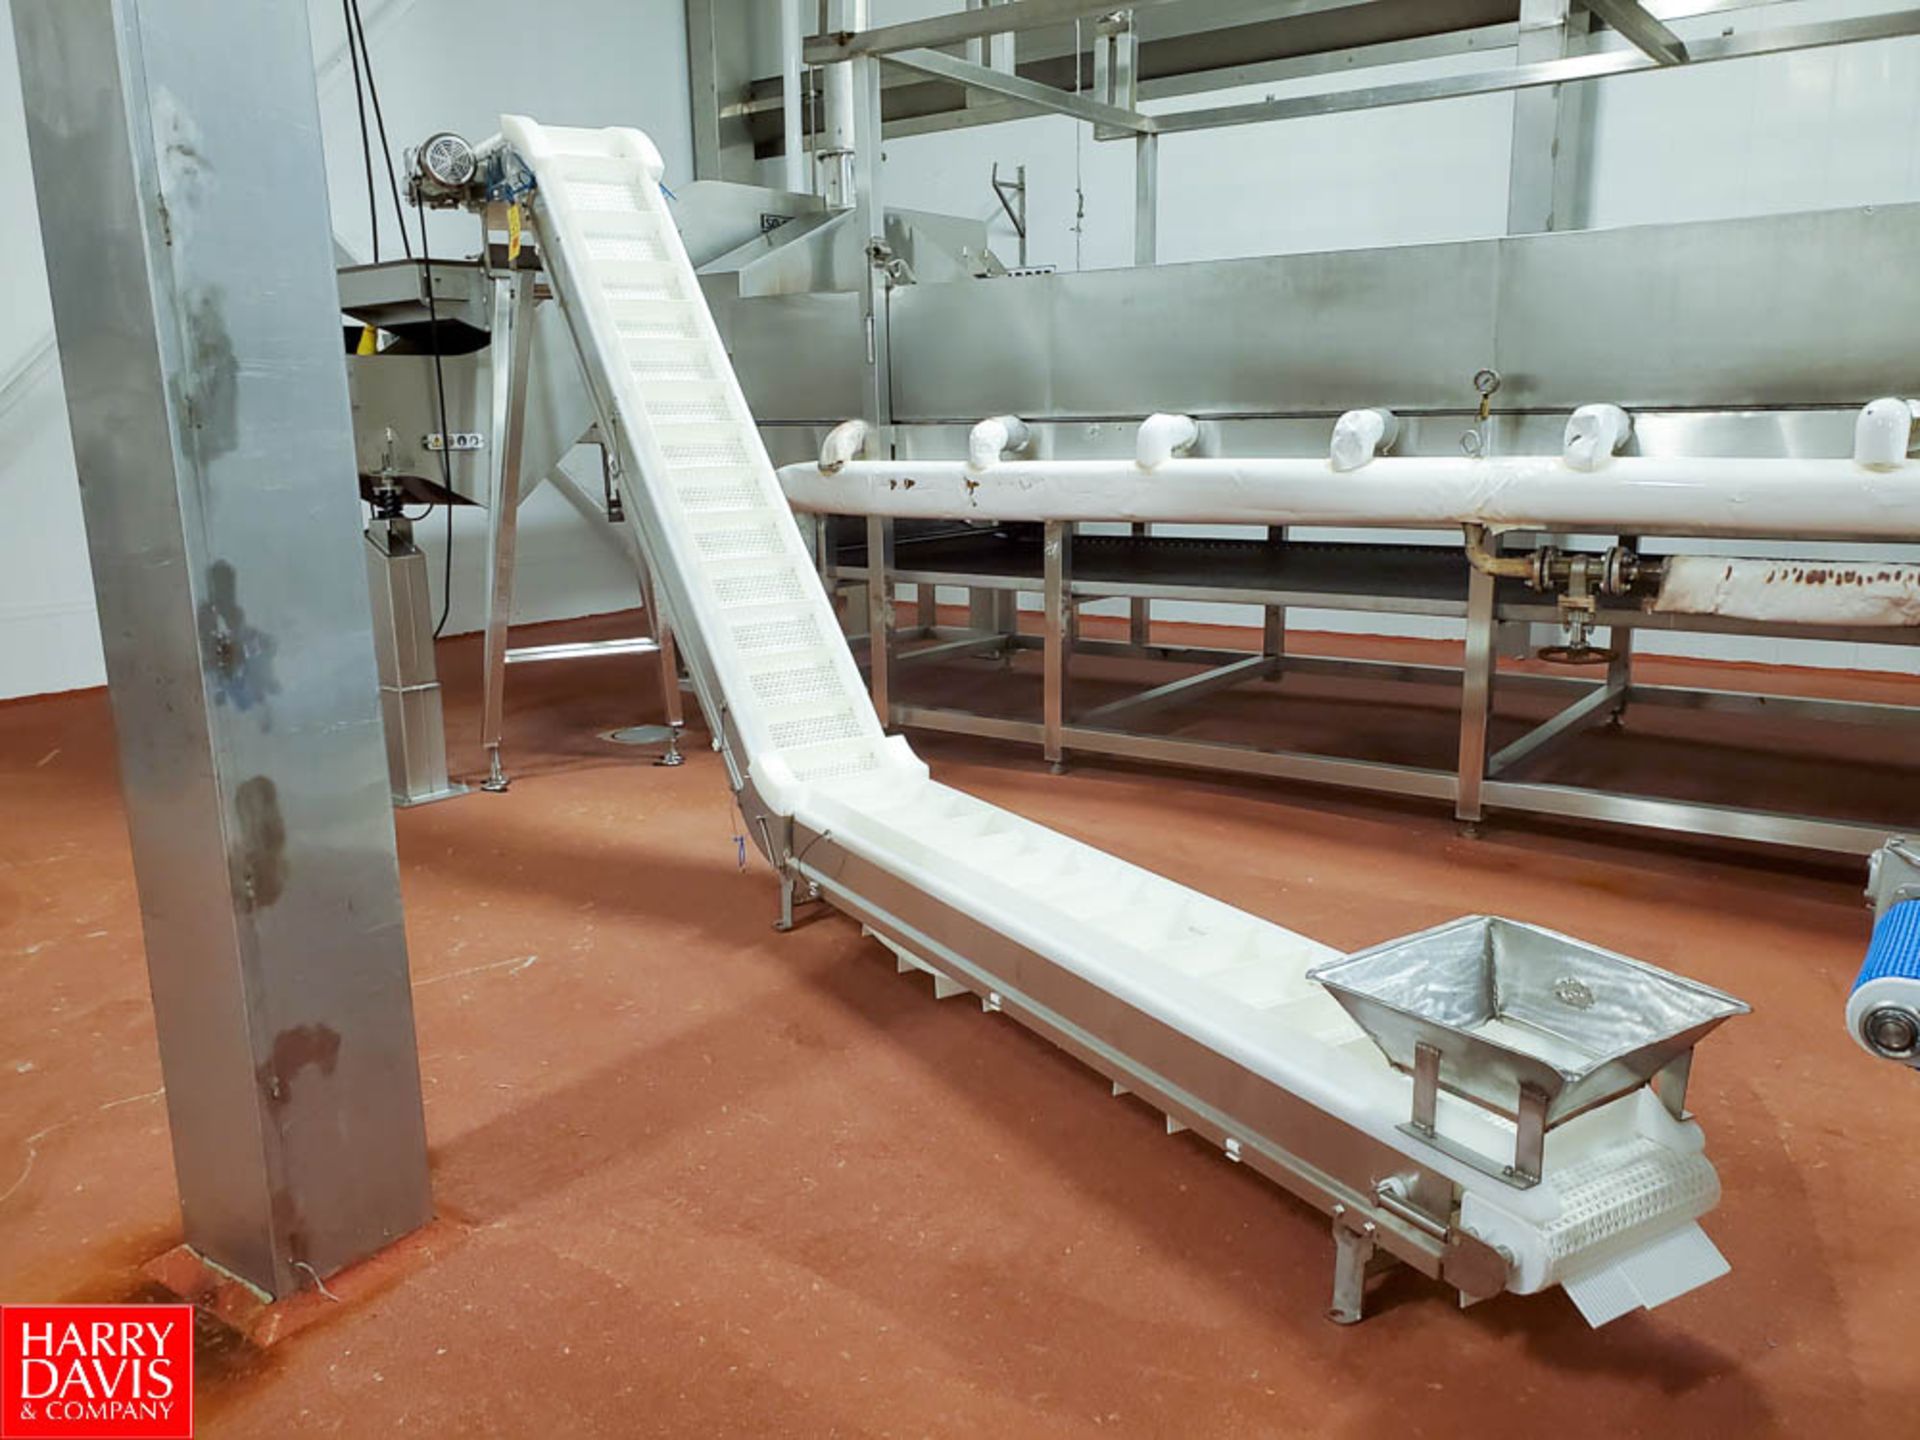 Dorner S/S Frame Inclined Conveyor , 17'6" L, 11"W; with Ele Motor HP 1-3/4, Interlox Belt And Drive - Image 2 of 3